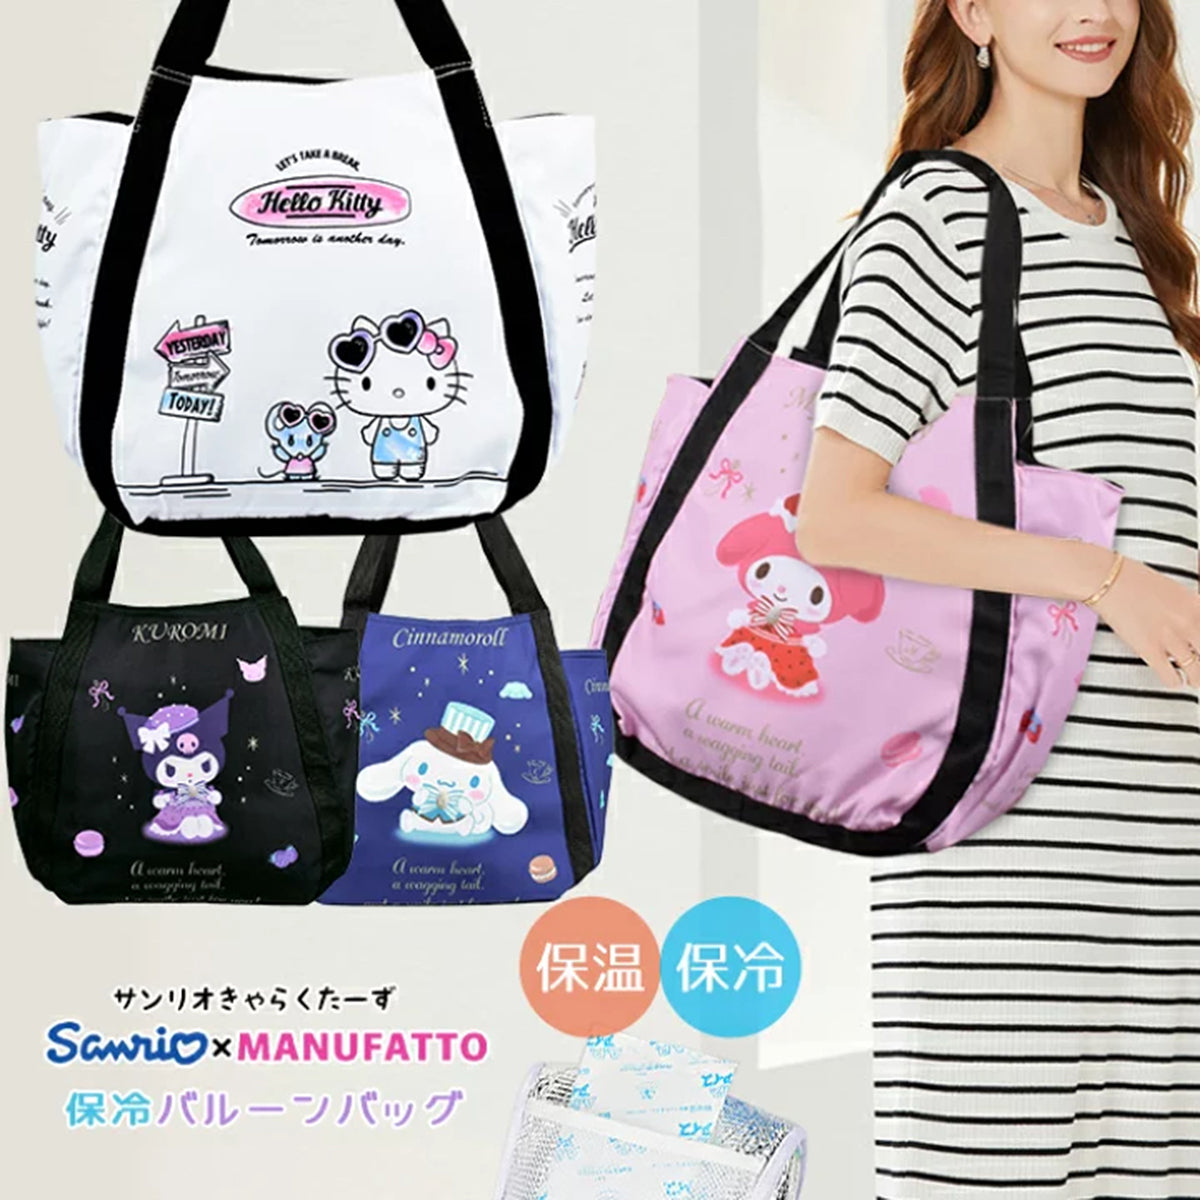 Balloon Hat & Suit Tote Bag - Sanrio Character (Japan Edition)